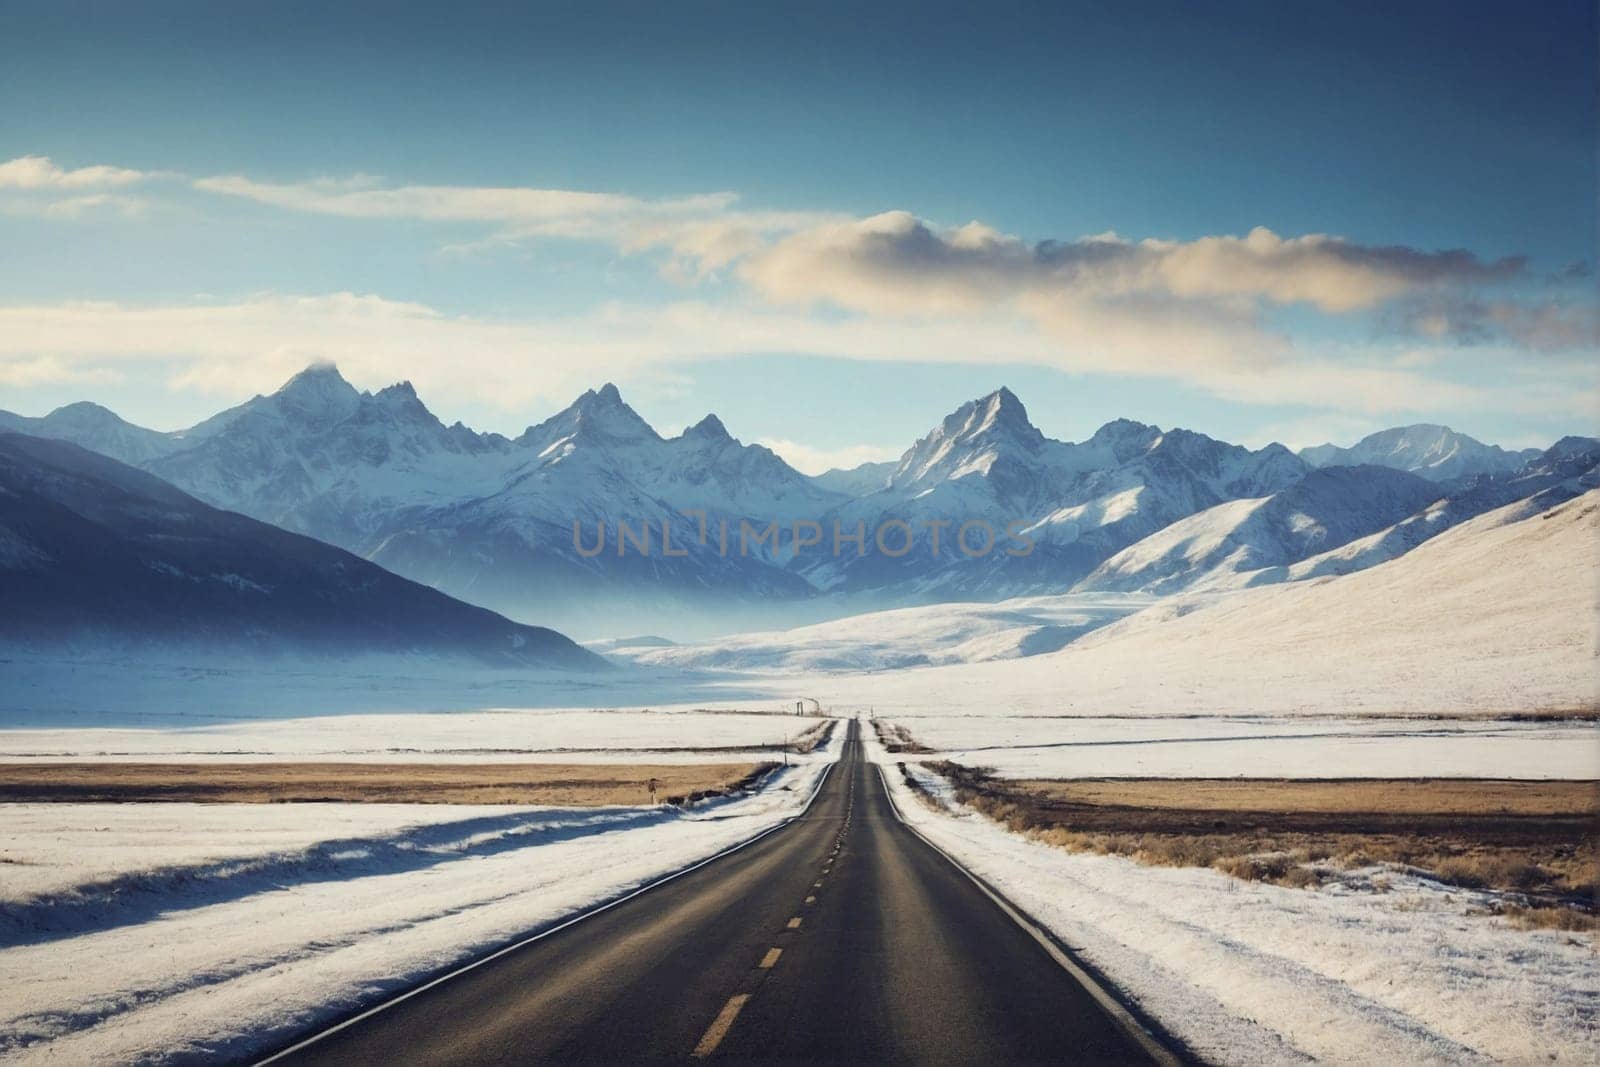 An empty road winds through a snow-covered mountain range, with the rugged peaks and snowy landscape creating a dramatic backdrop.